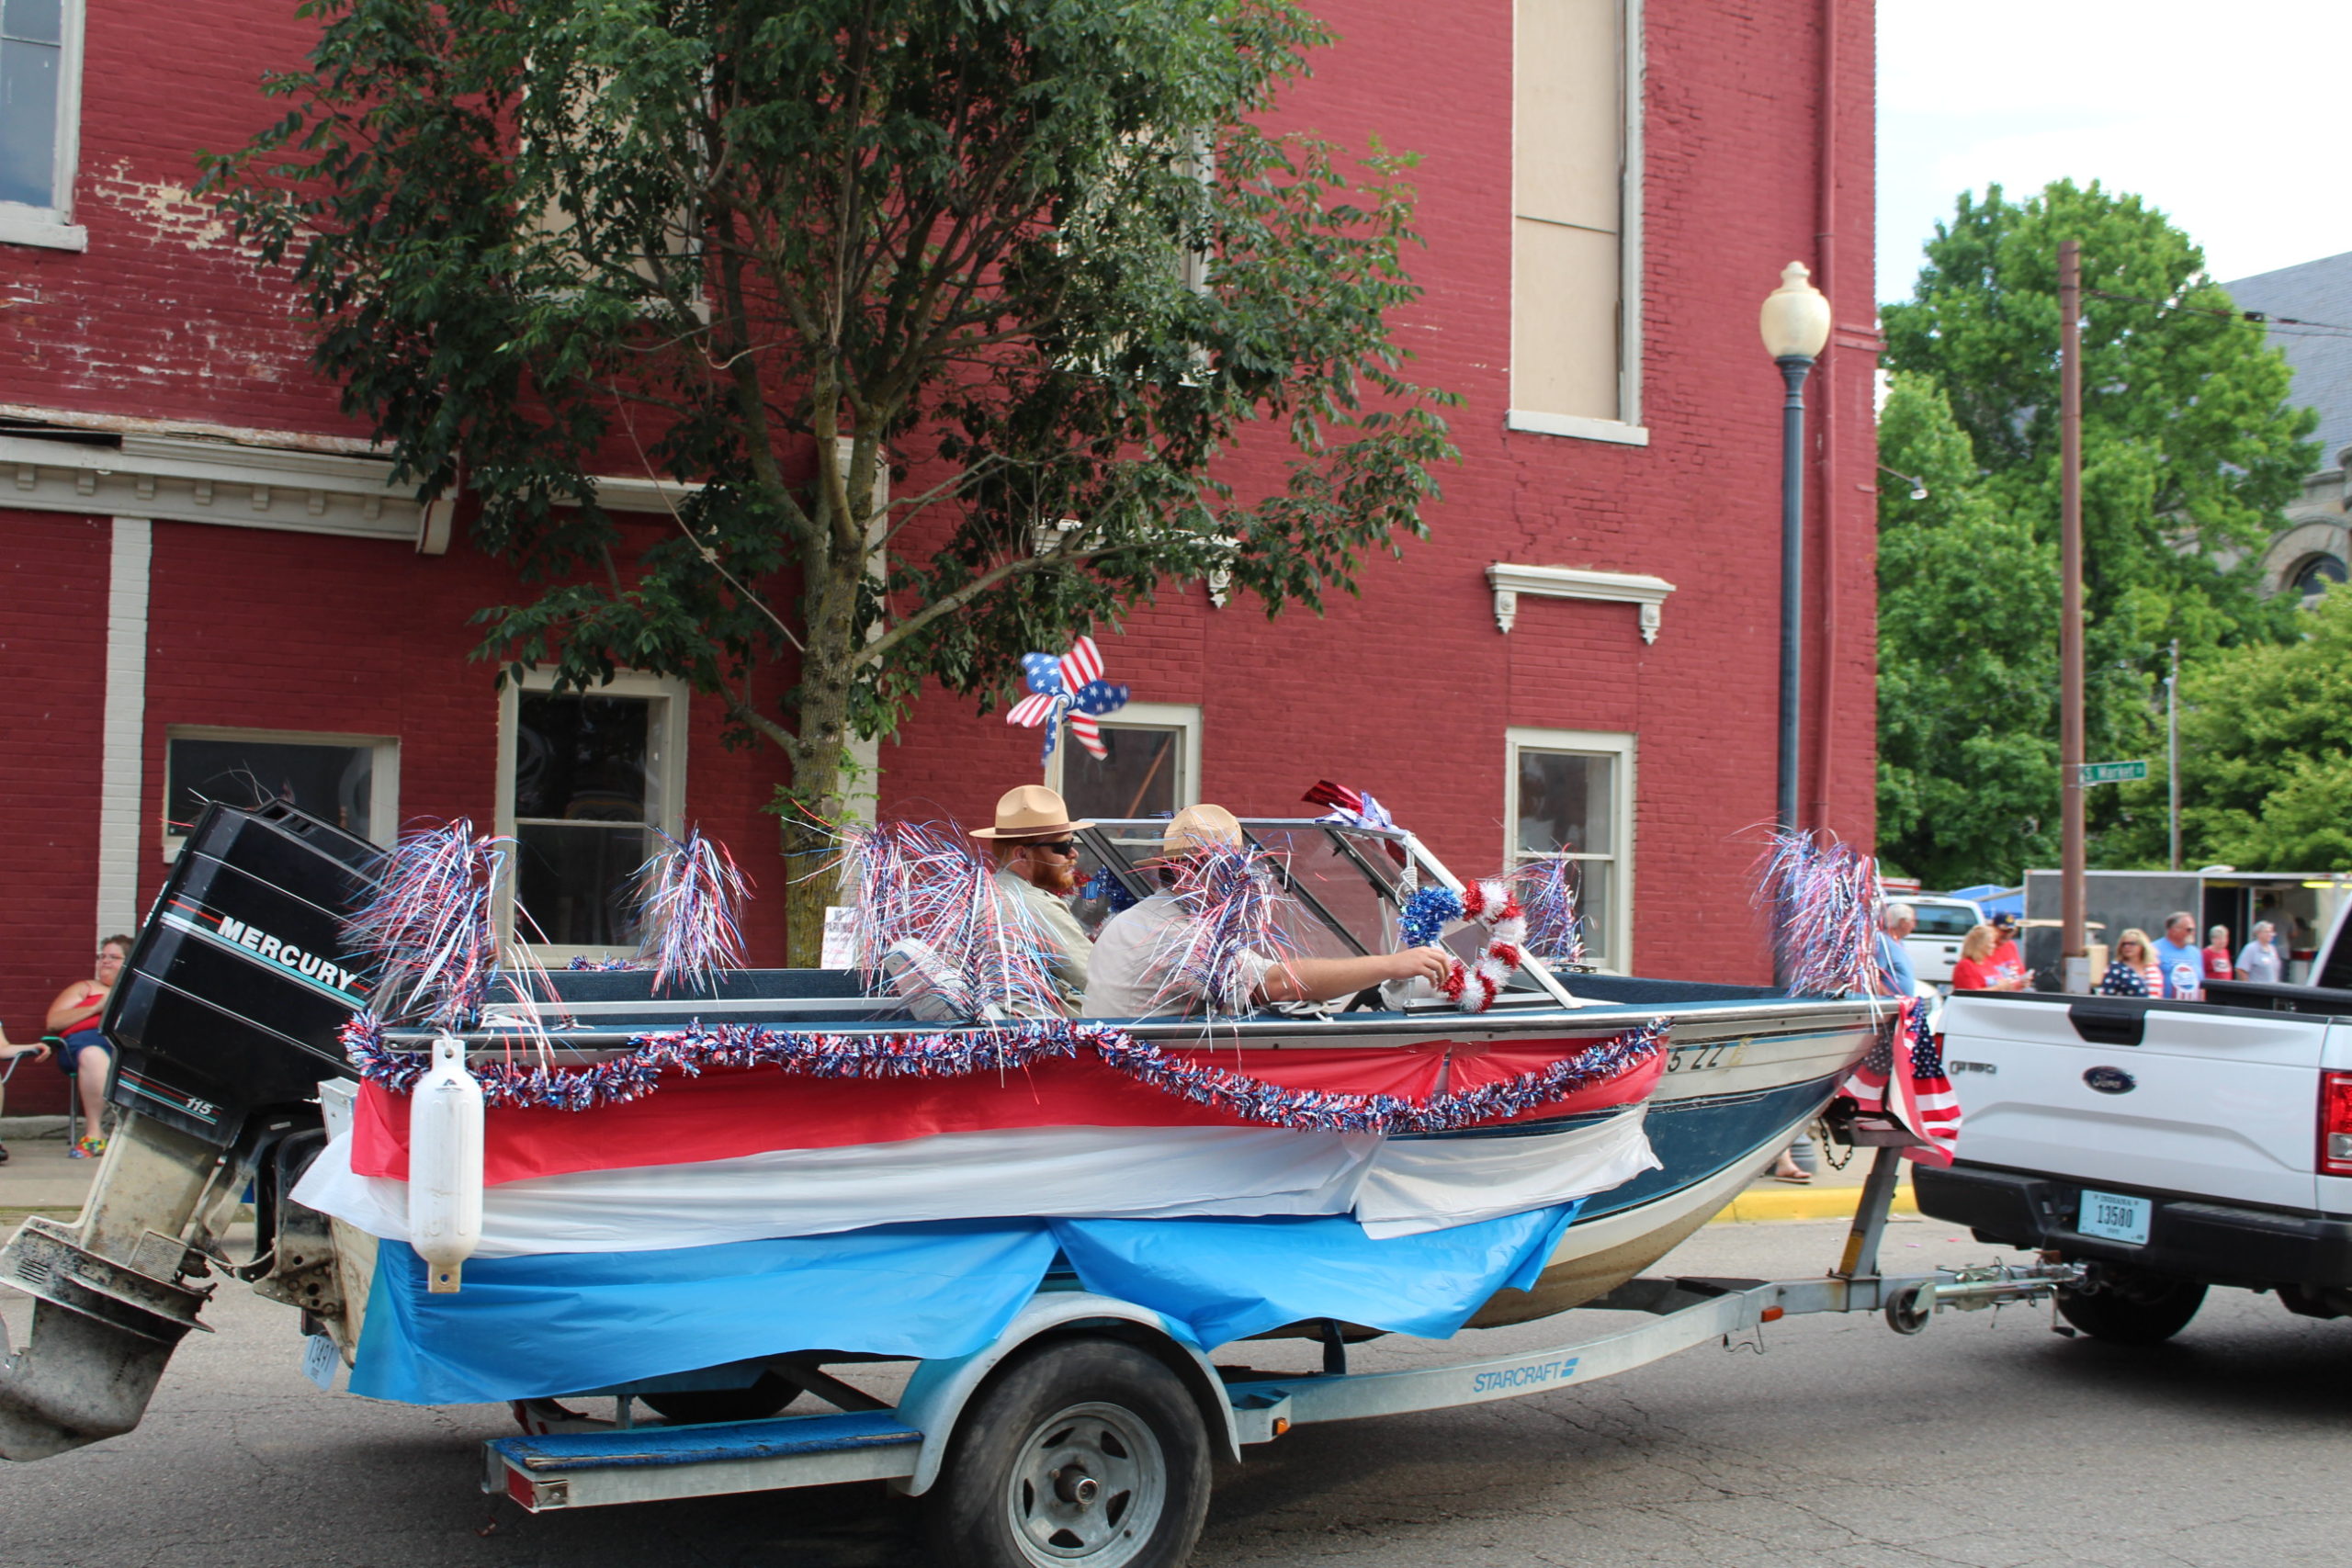 More photos from the Liberty Festival 4th of July parade and the